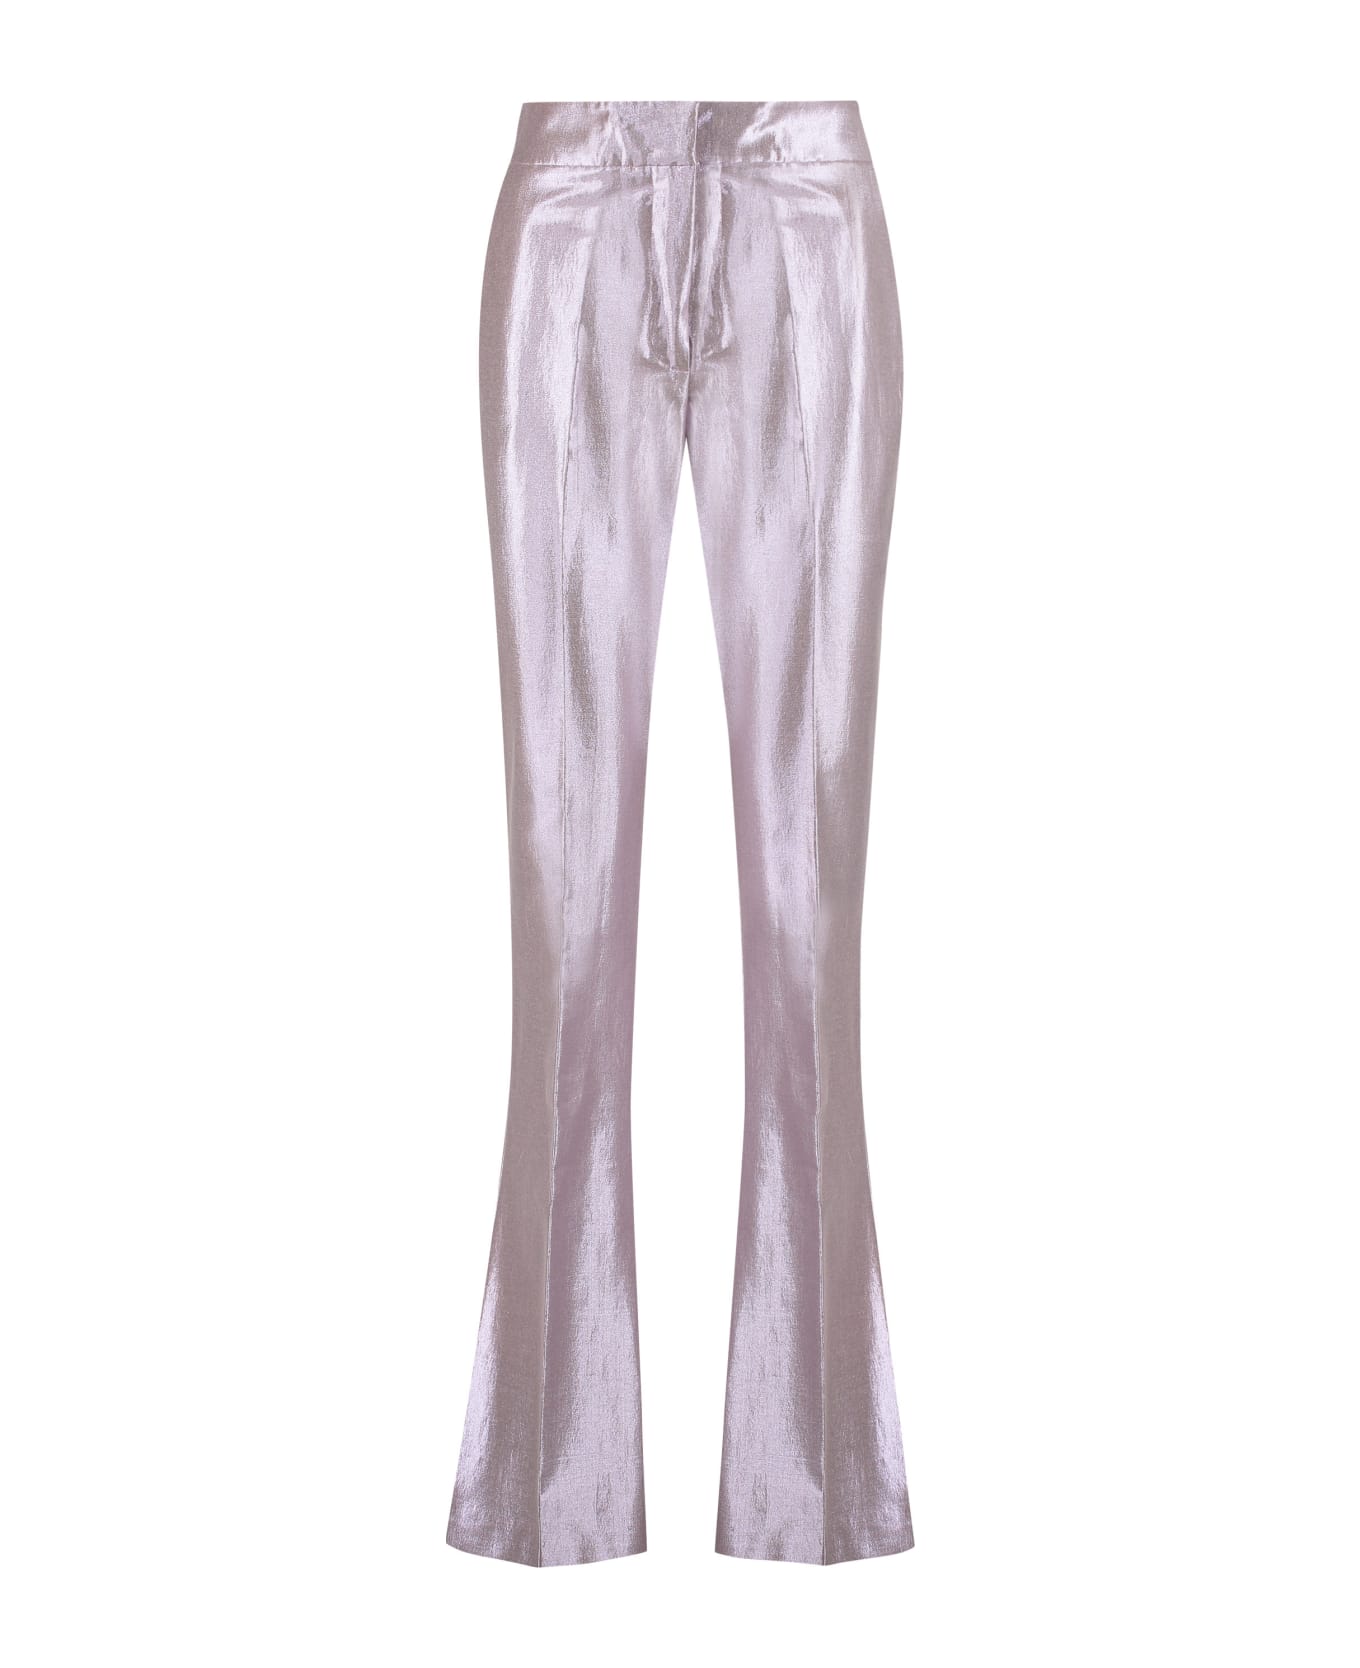 Genny Lurex Cotton Trousers - Lilac ボトムス